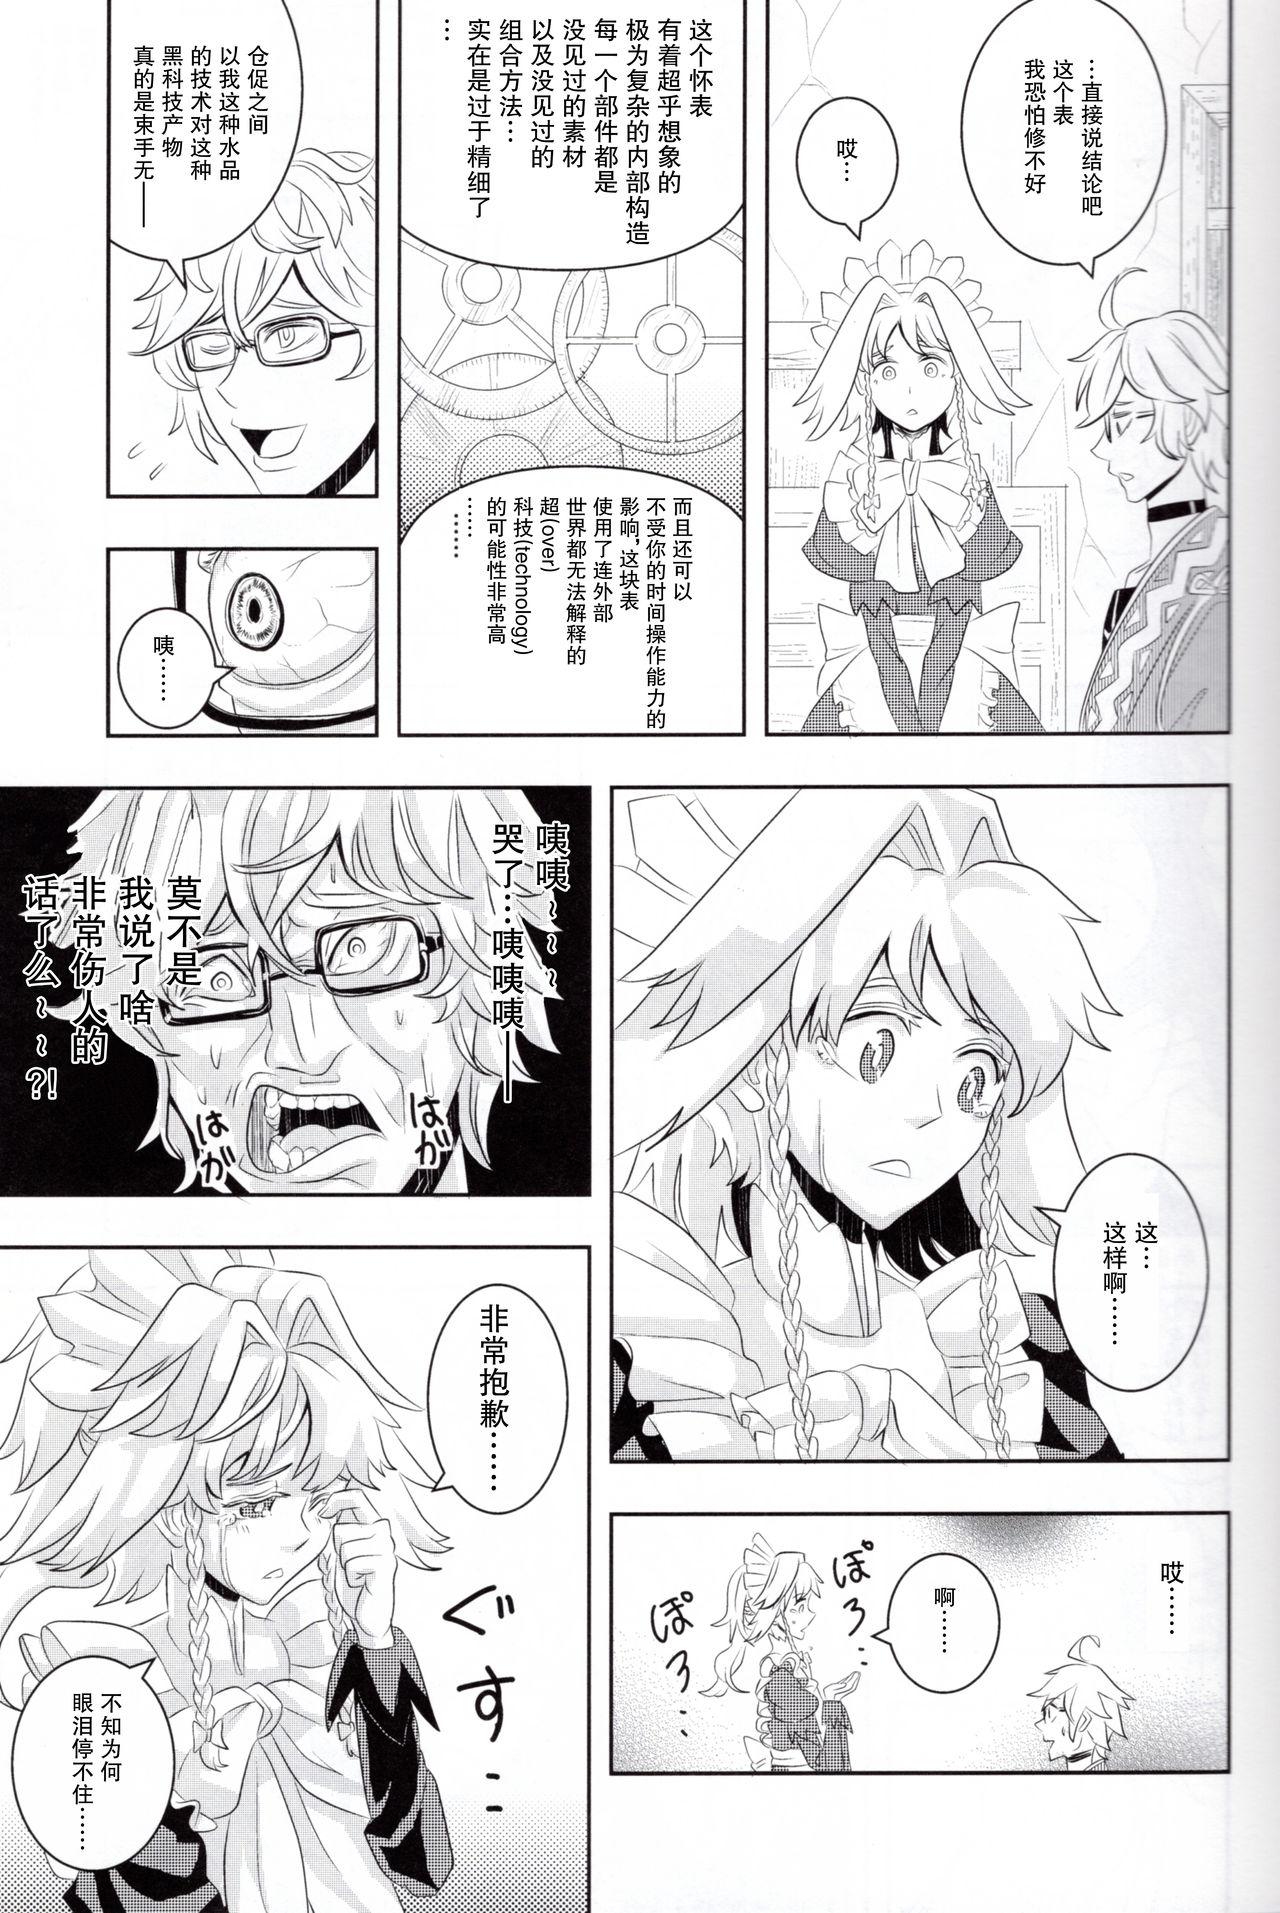 Licking Pussy Maid to Tenshu to Kaichuudokei to - Touhou project Fucking Girls - Page 4